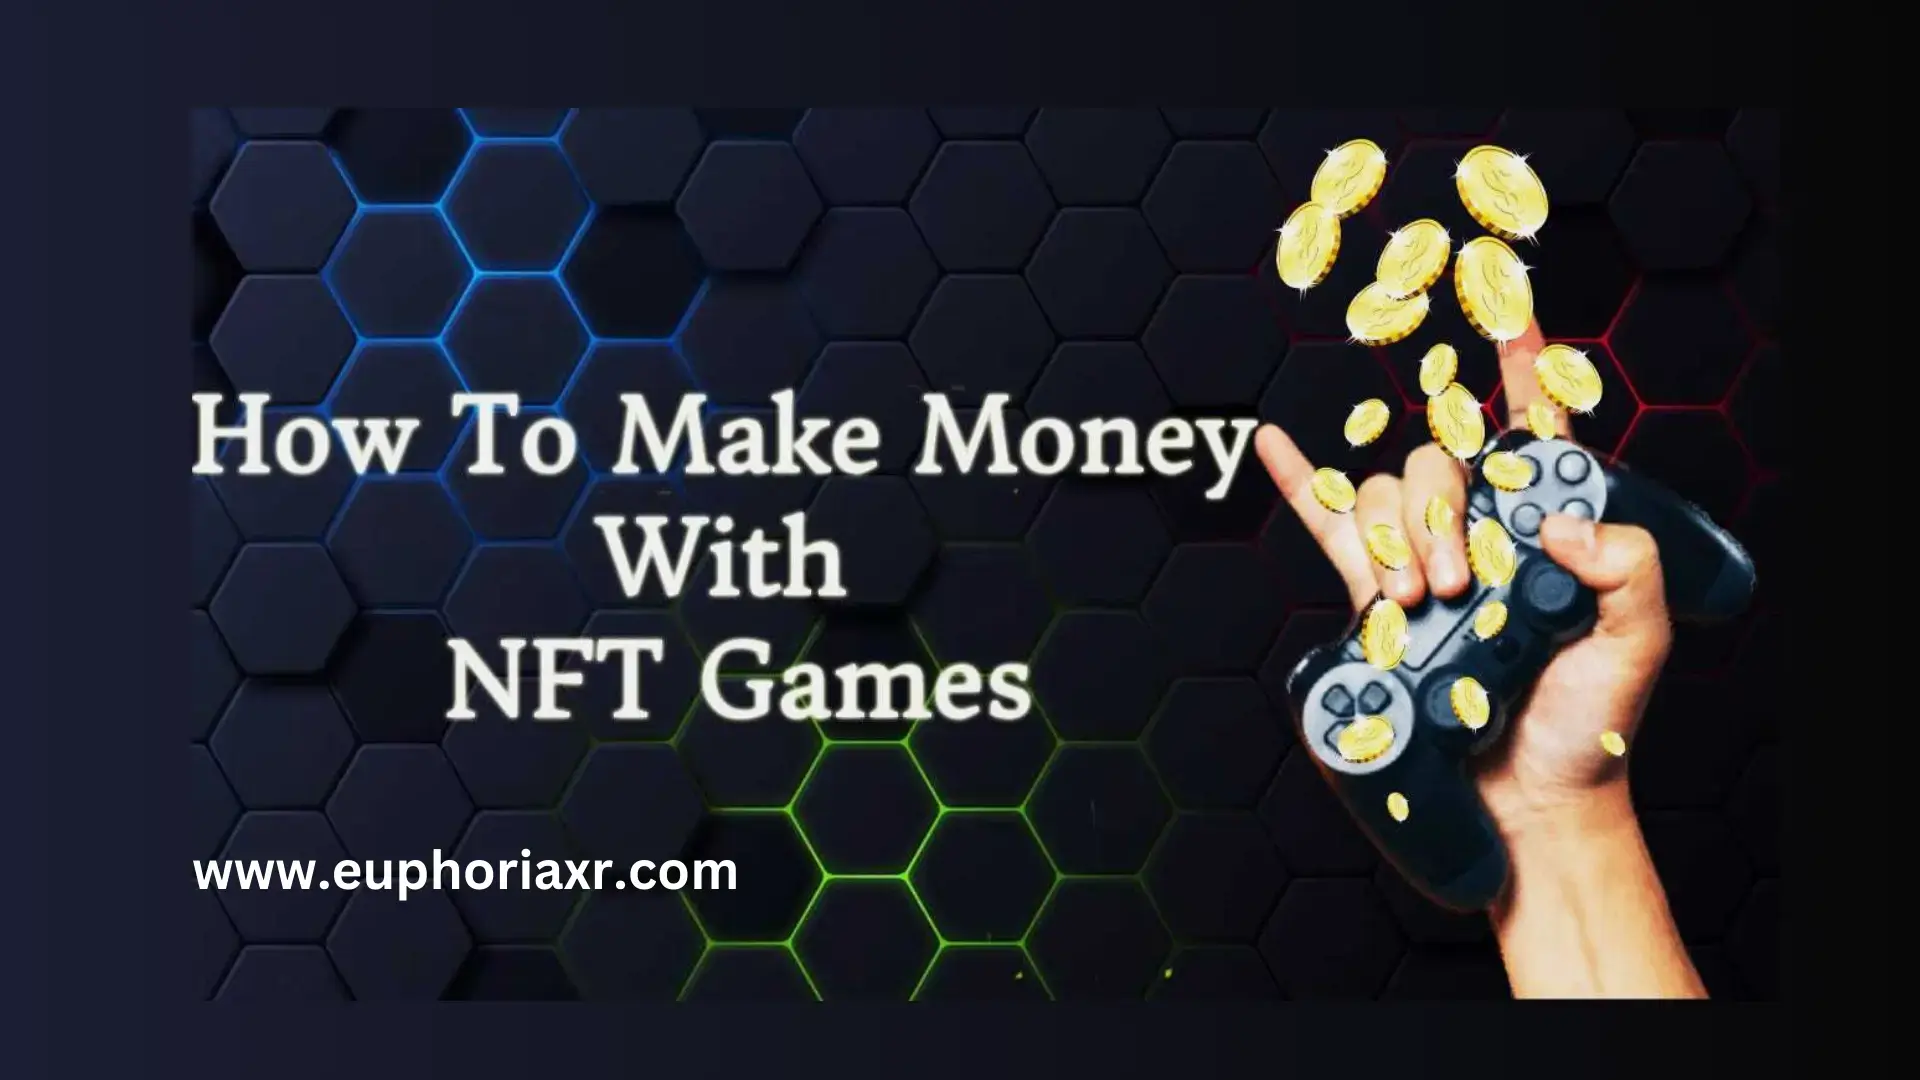 How To Make Money With NFT Games?